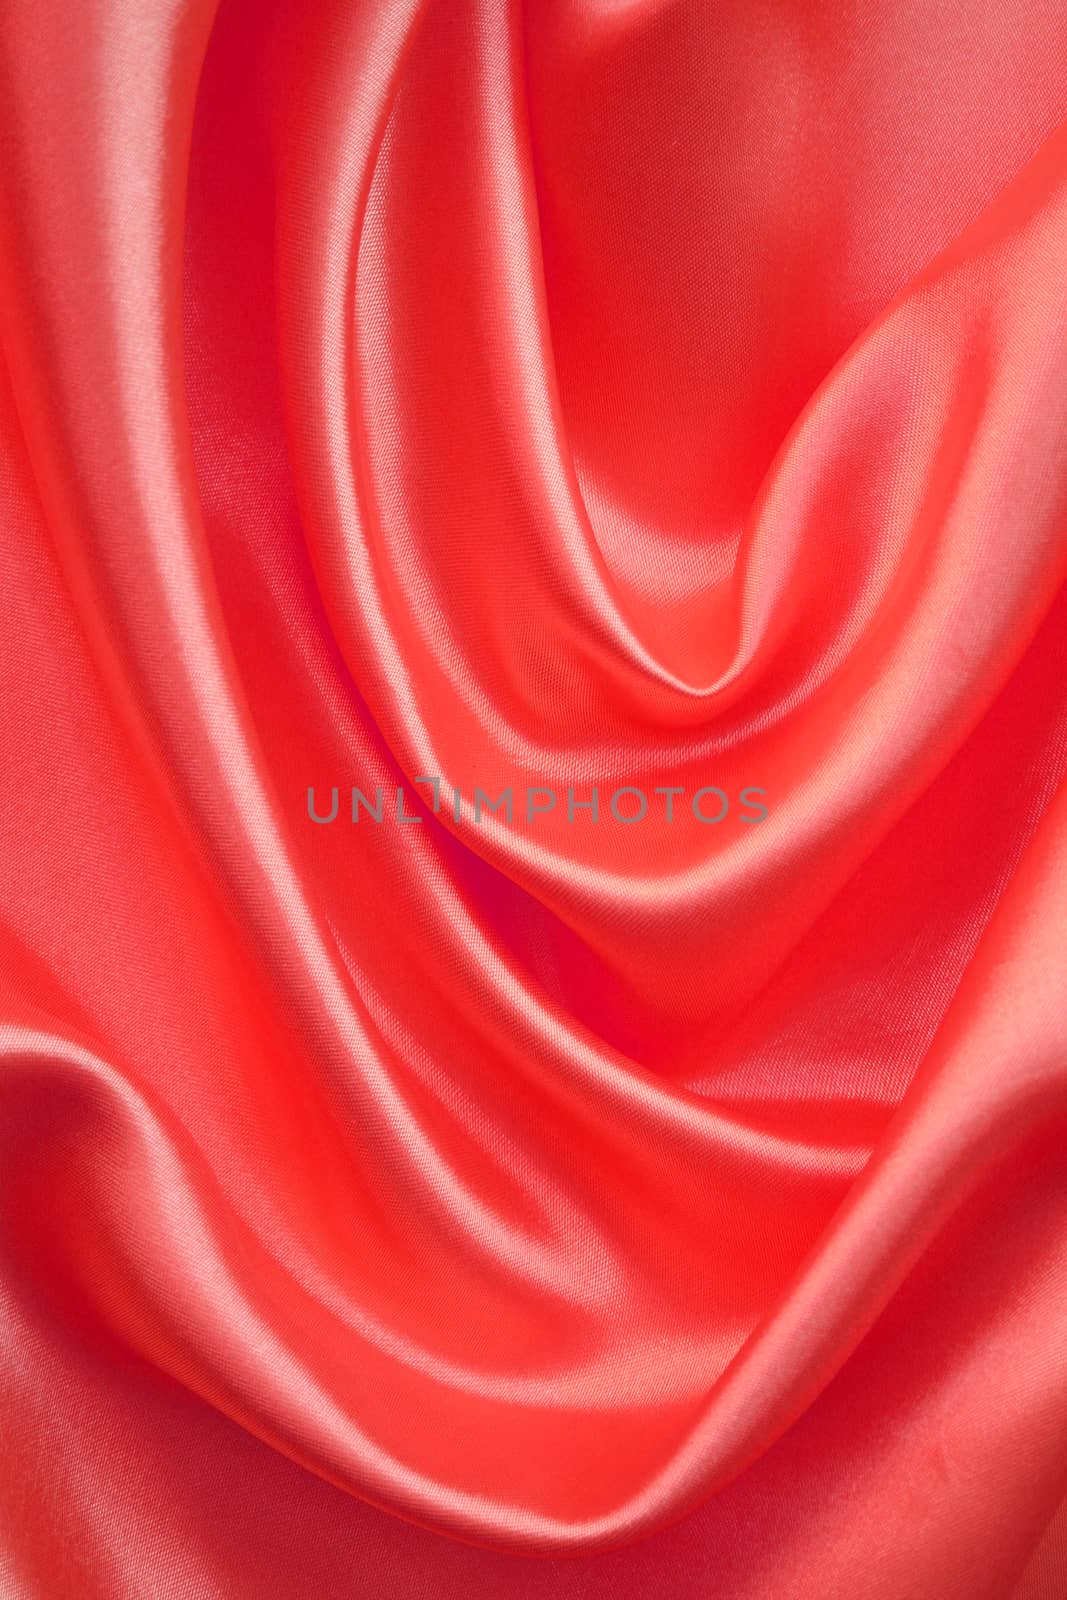 Smooth elegant red silk as background  by oxanatravel